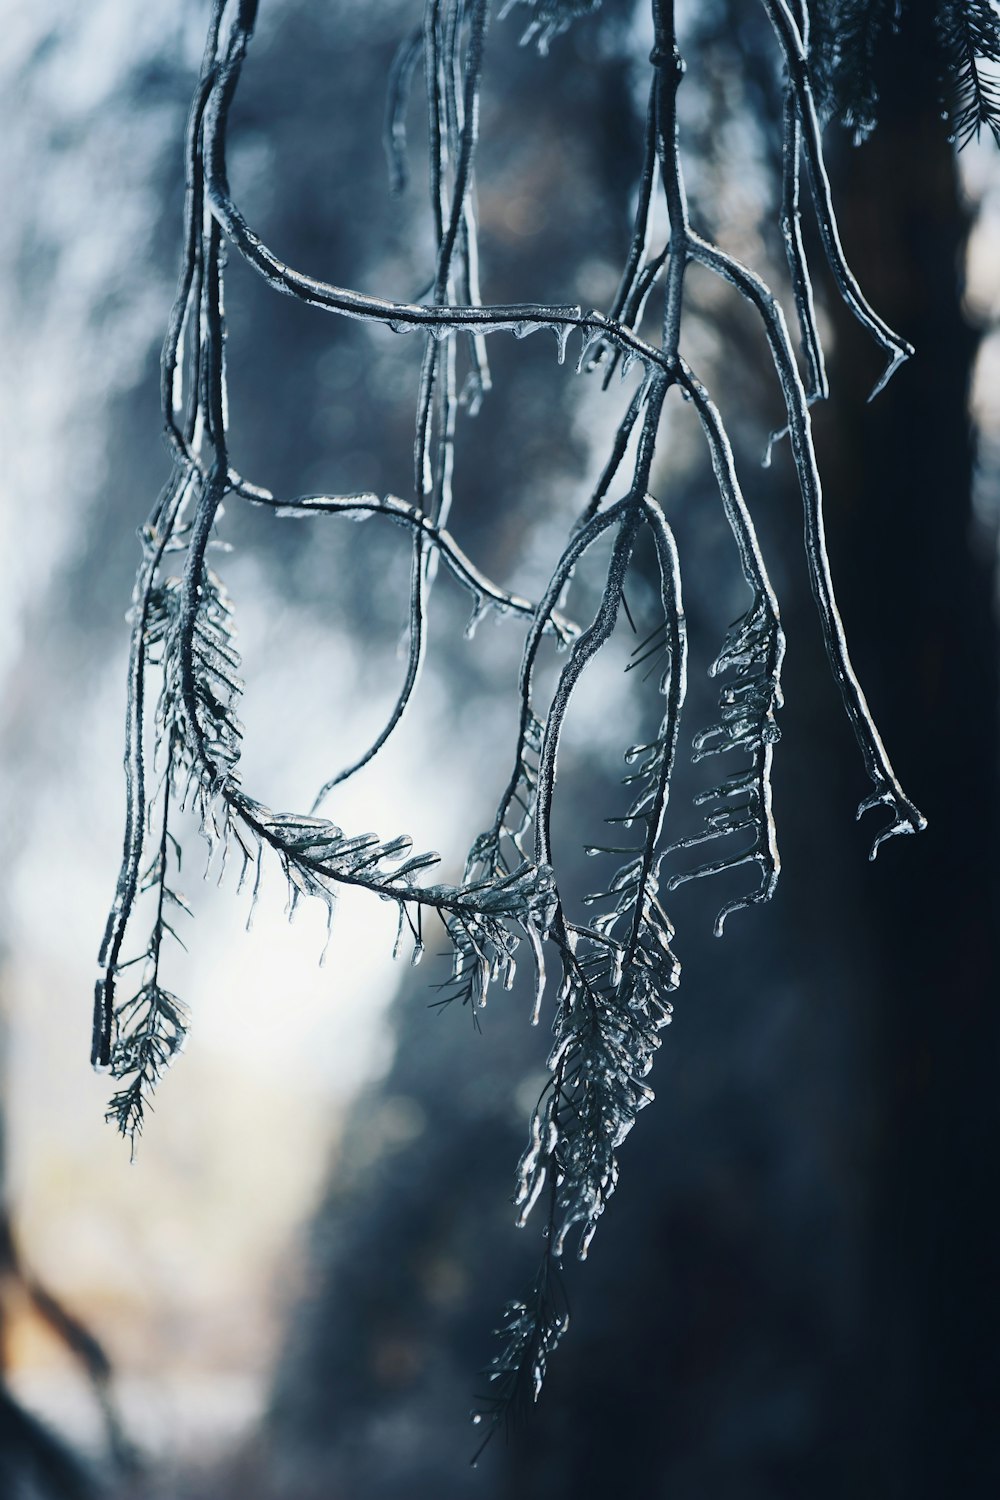 frozen tree branches